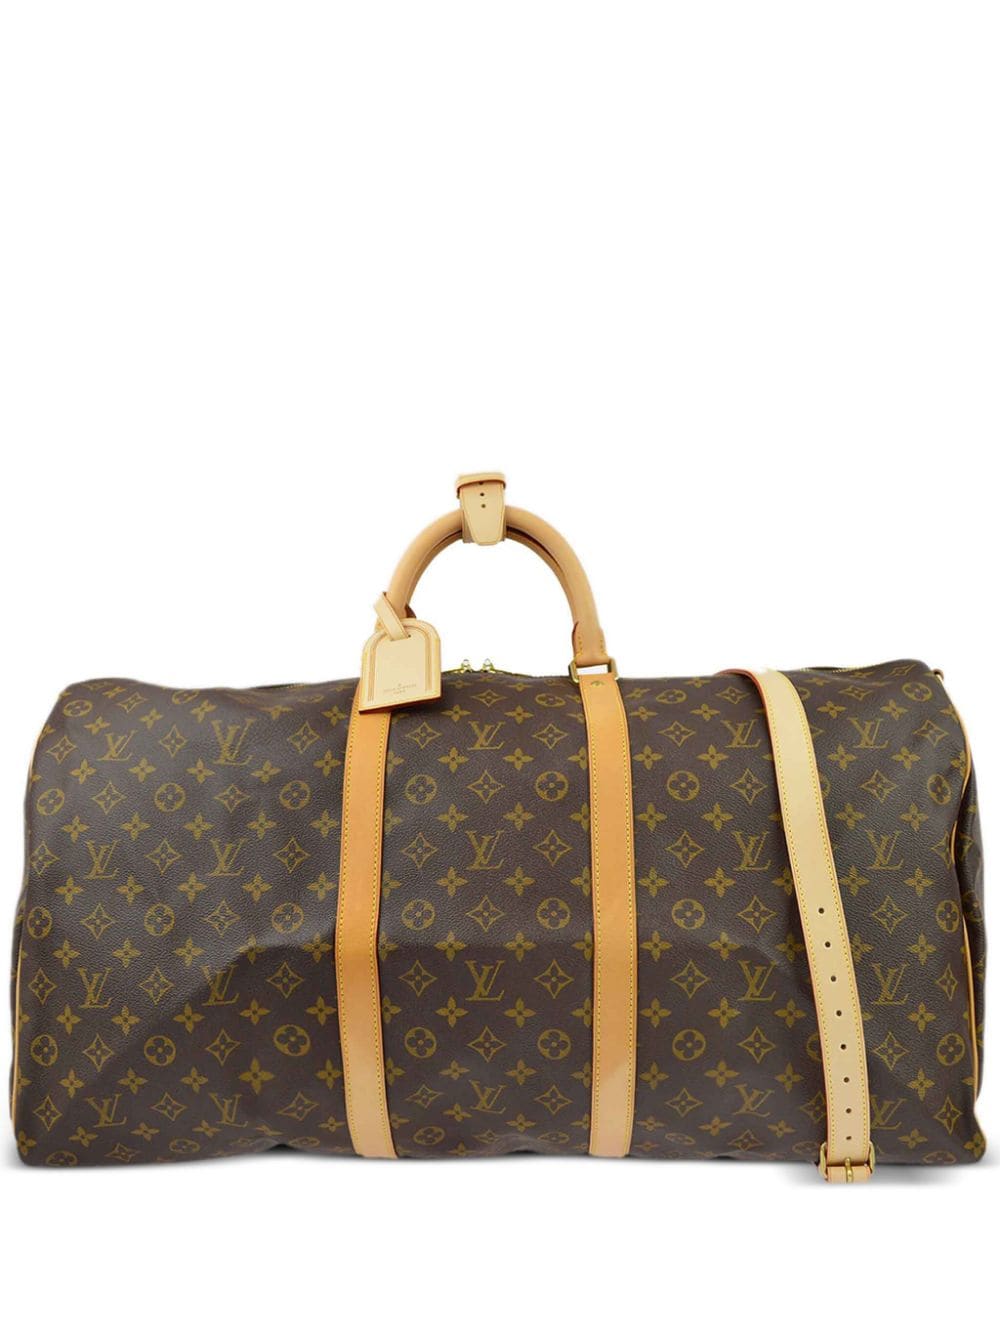 Pre-owned Louis Vuitton 2009 Keepall Bandouliere 60 Two-way Travel Bag In Brown